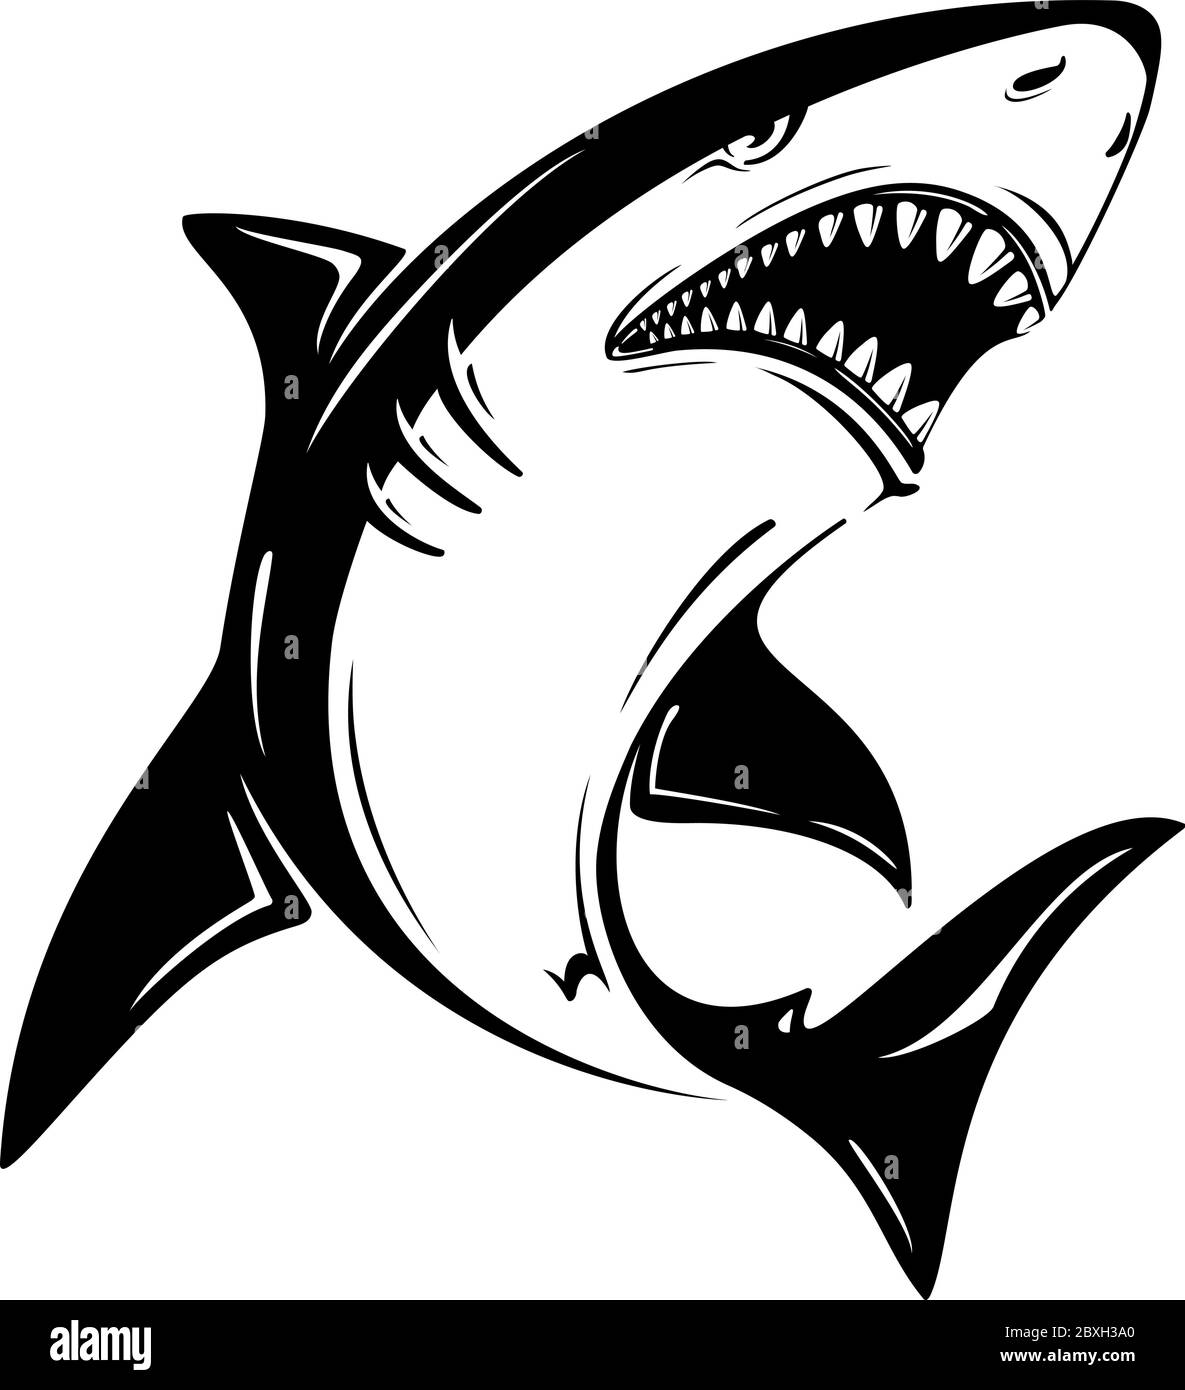 Angry black shark vector illustration isolated on white background. Perfect to use for printing on tshirts, mugs, caps, logos, mascots or other advert Stock Vector